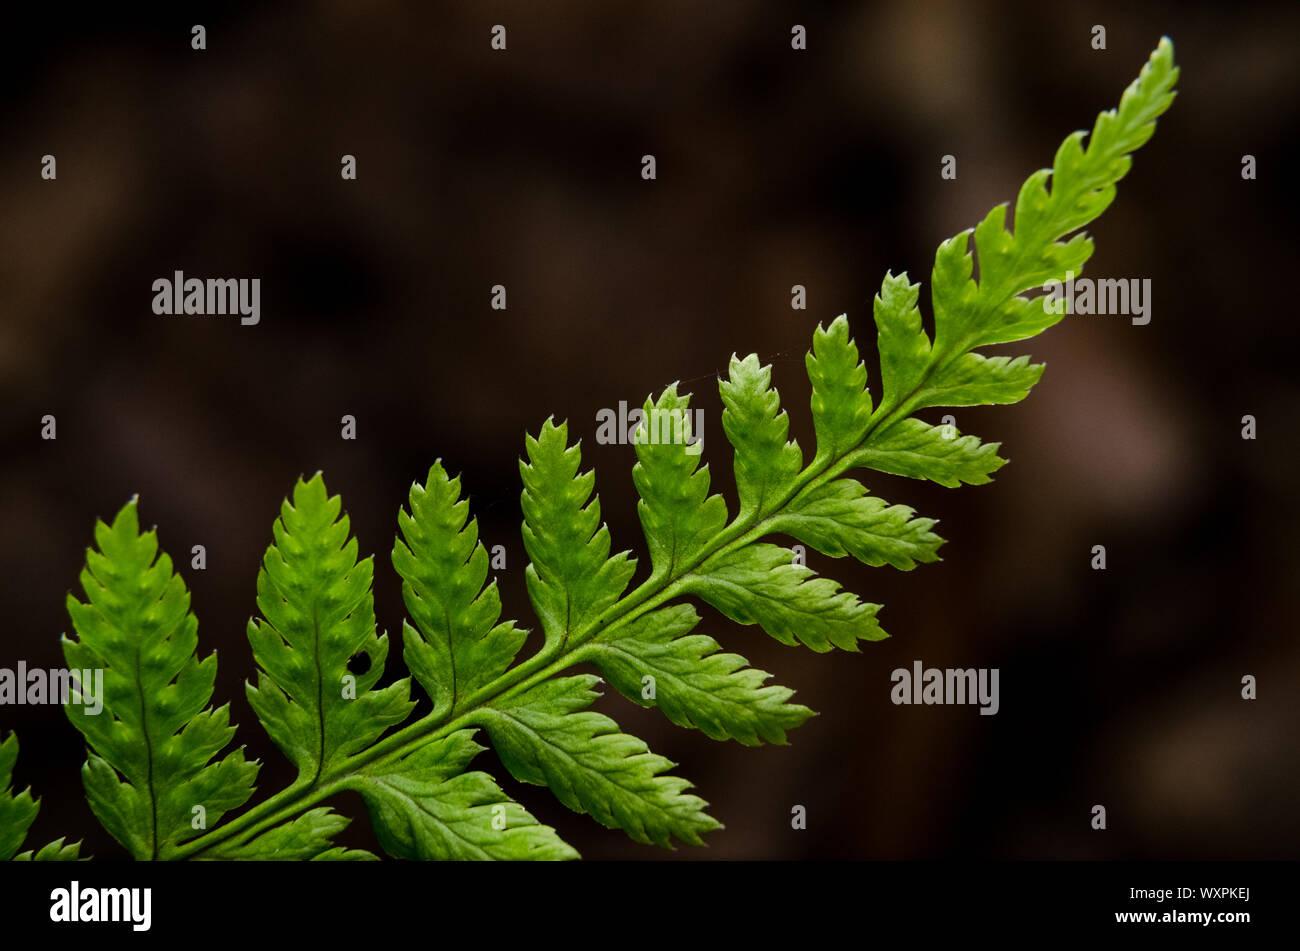 Polypodiopsida, macro photograph of fern leaves in the forest against dark background Stock Photo